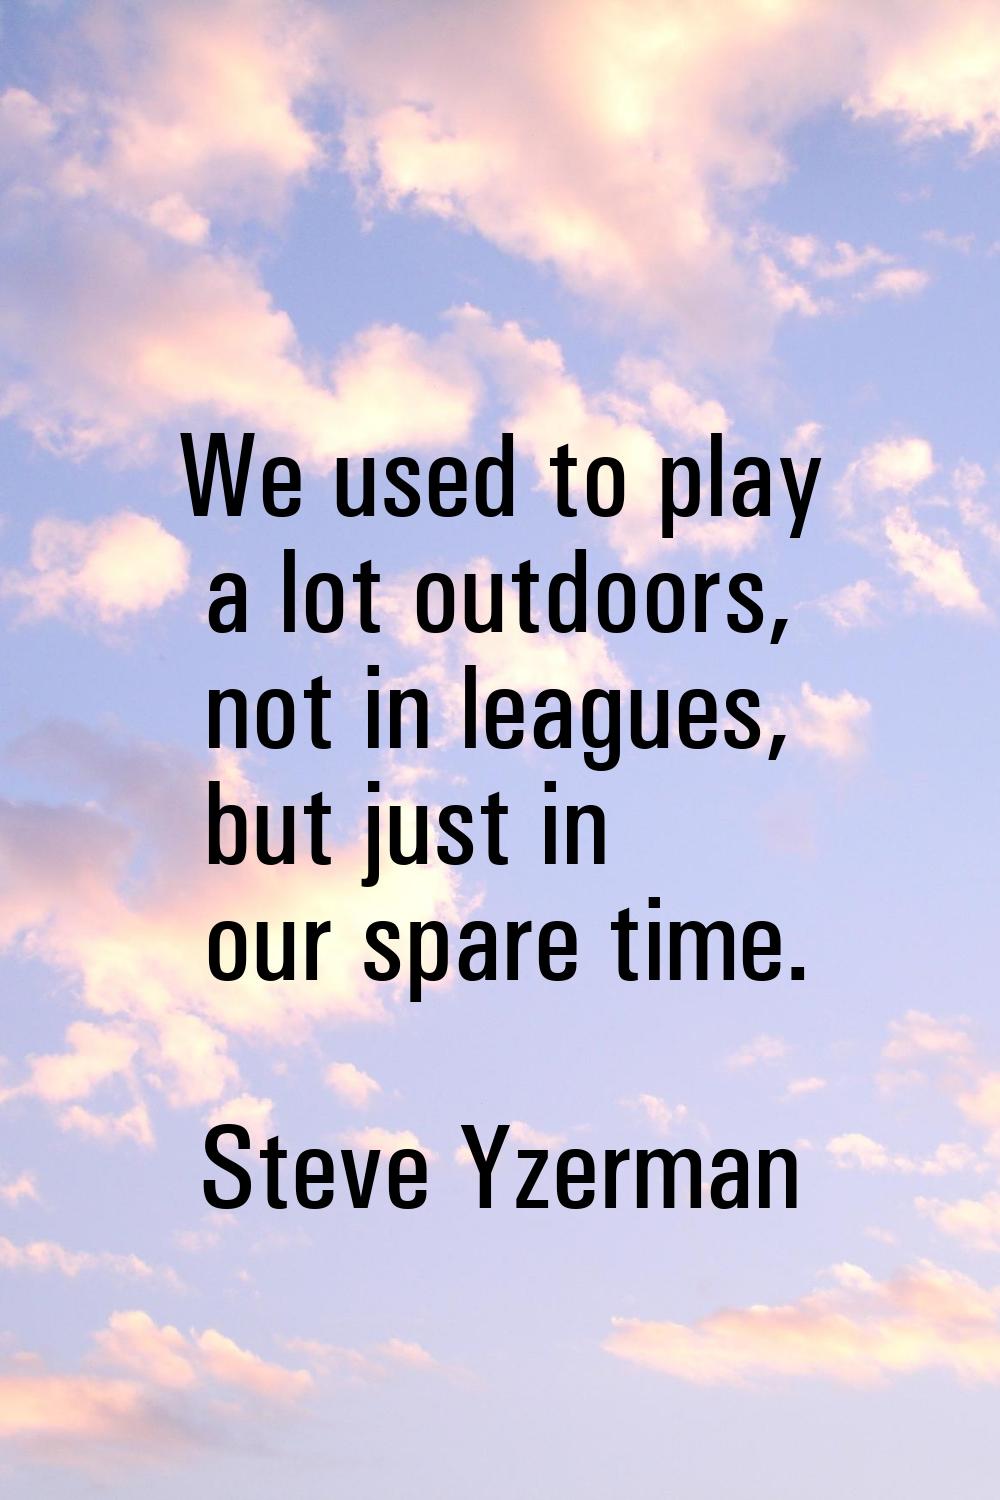 We used to play a lot outdoors, not in leagues, but just in our spare time.